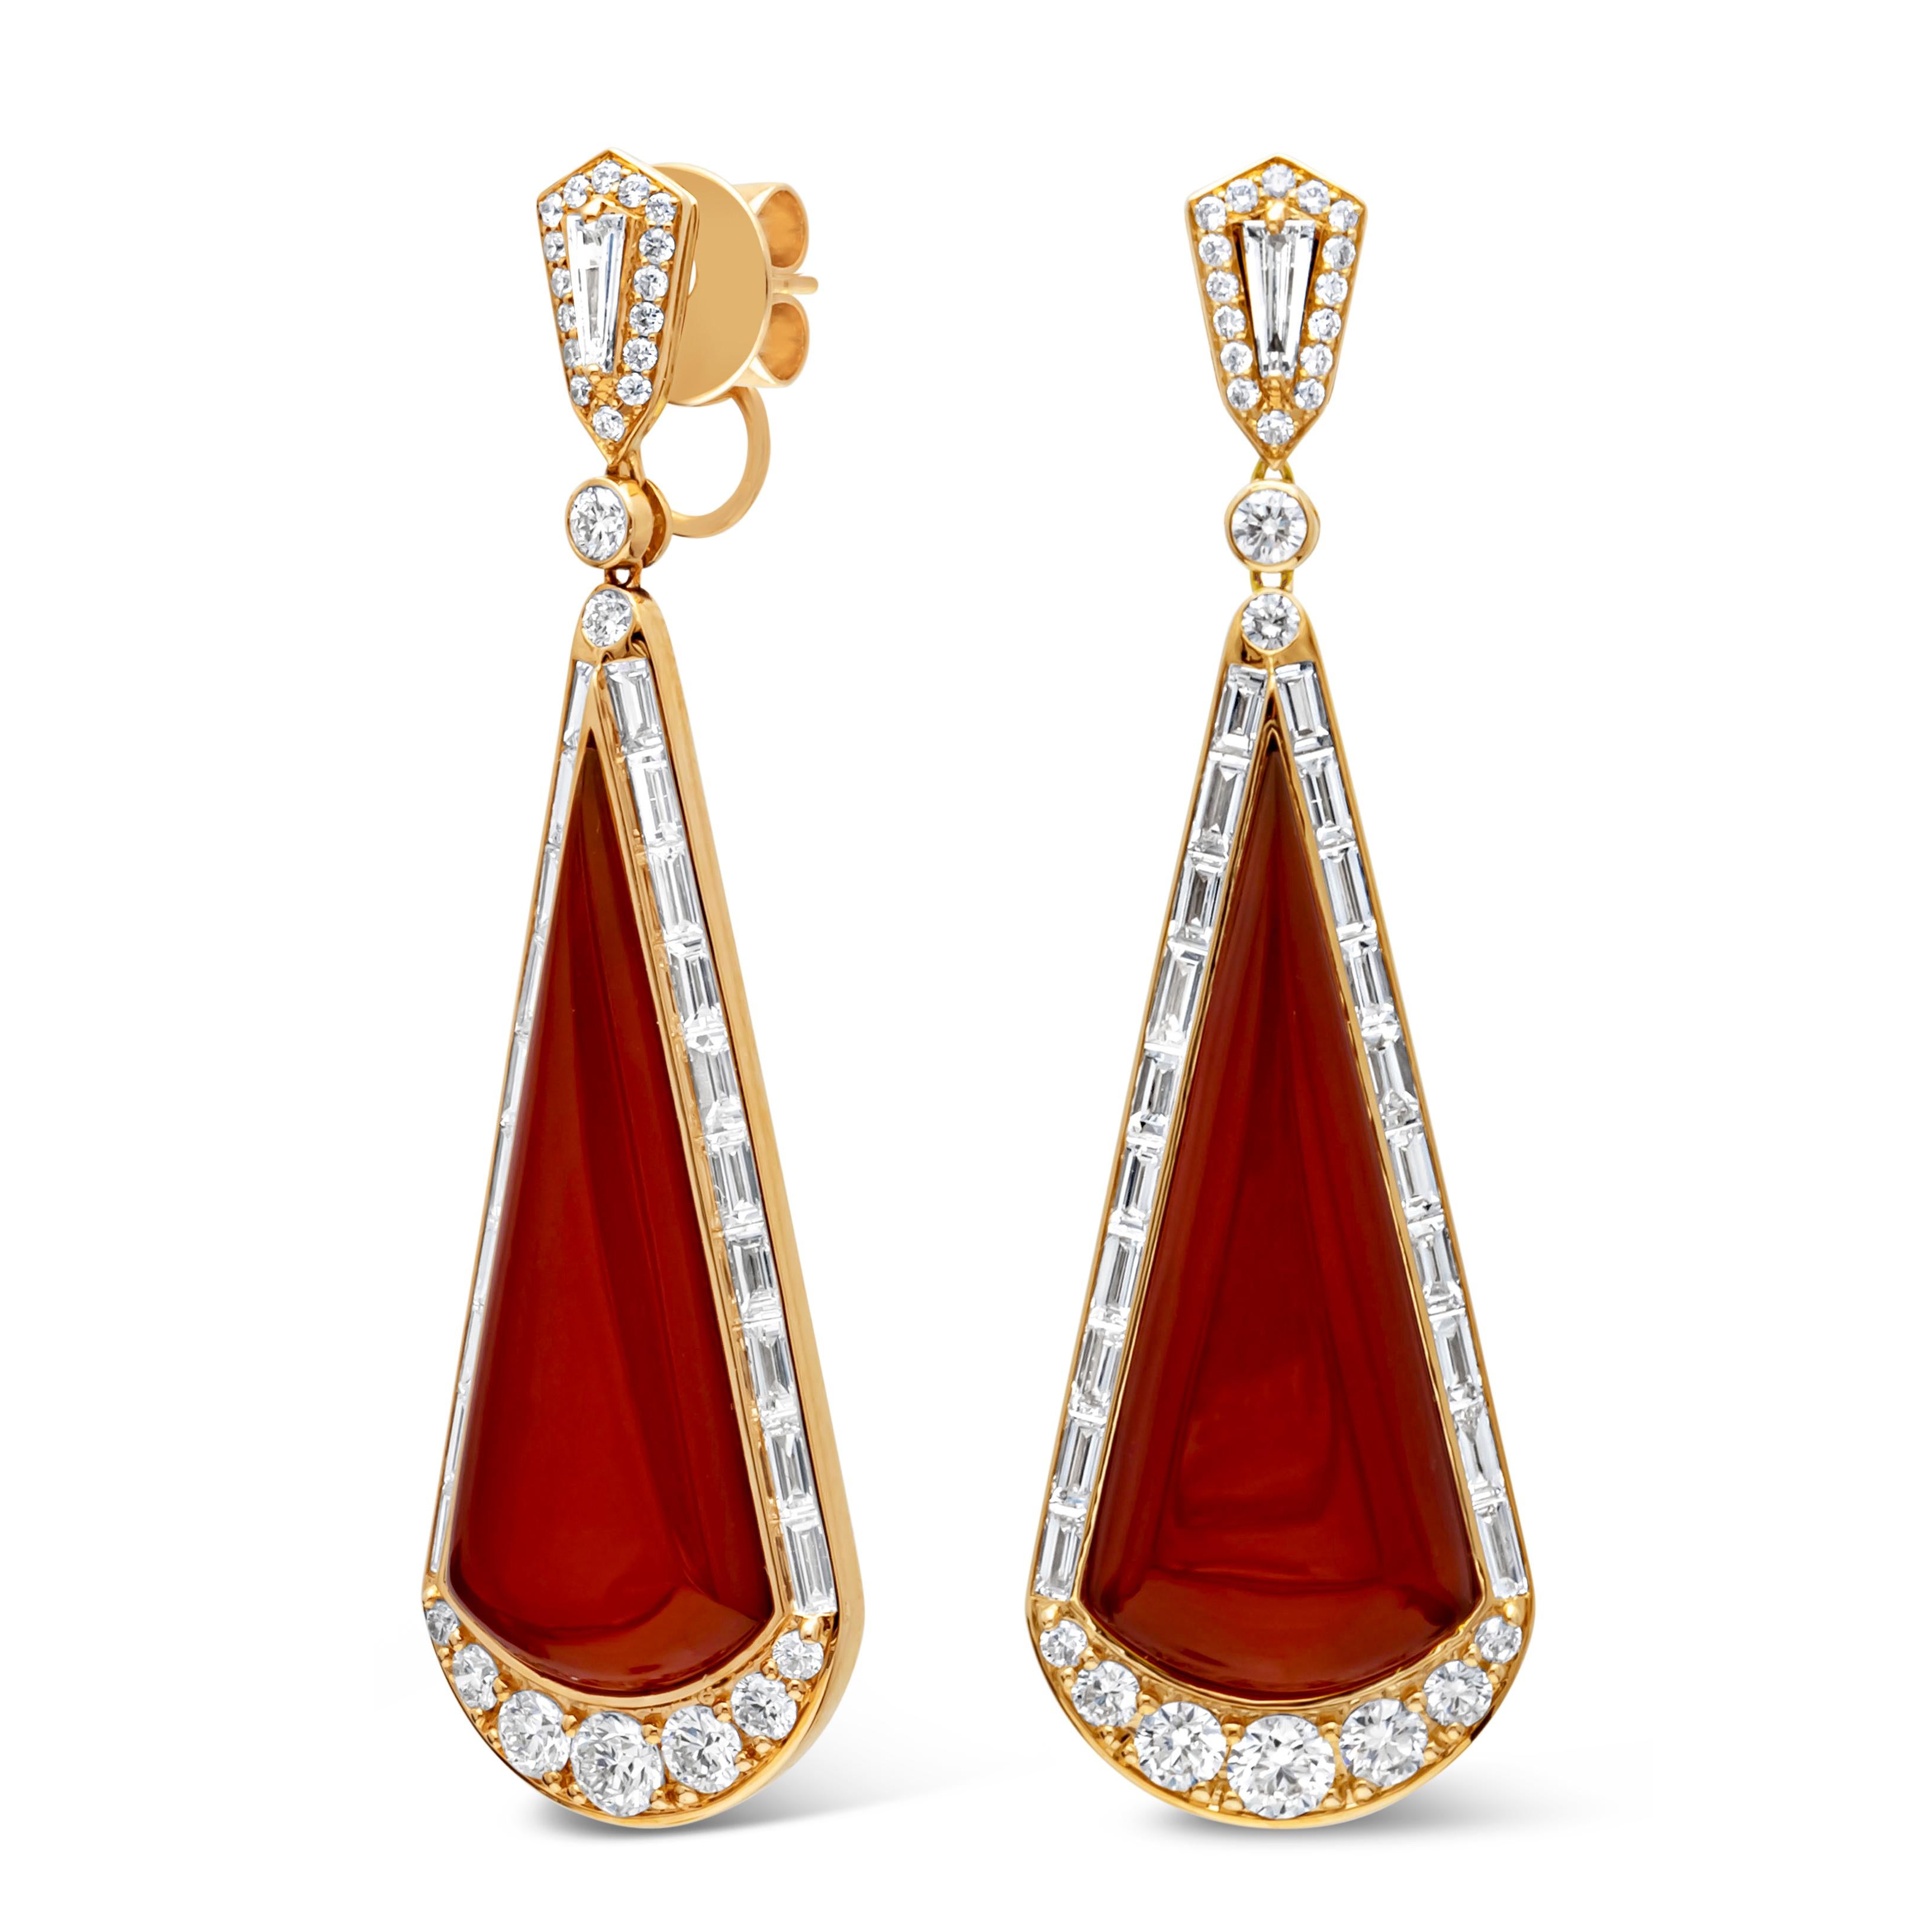 Showcasing a beautiful and fashionable dangle earrings set with color-rich brilliant trapezoid cut red agate stone weighing 18.15 carats total, surrounded by brilliant round and baguette cut diamonds in a timeless channel setting. Suspended on a